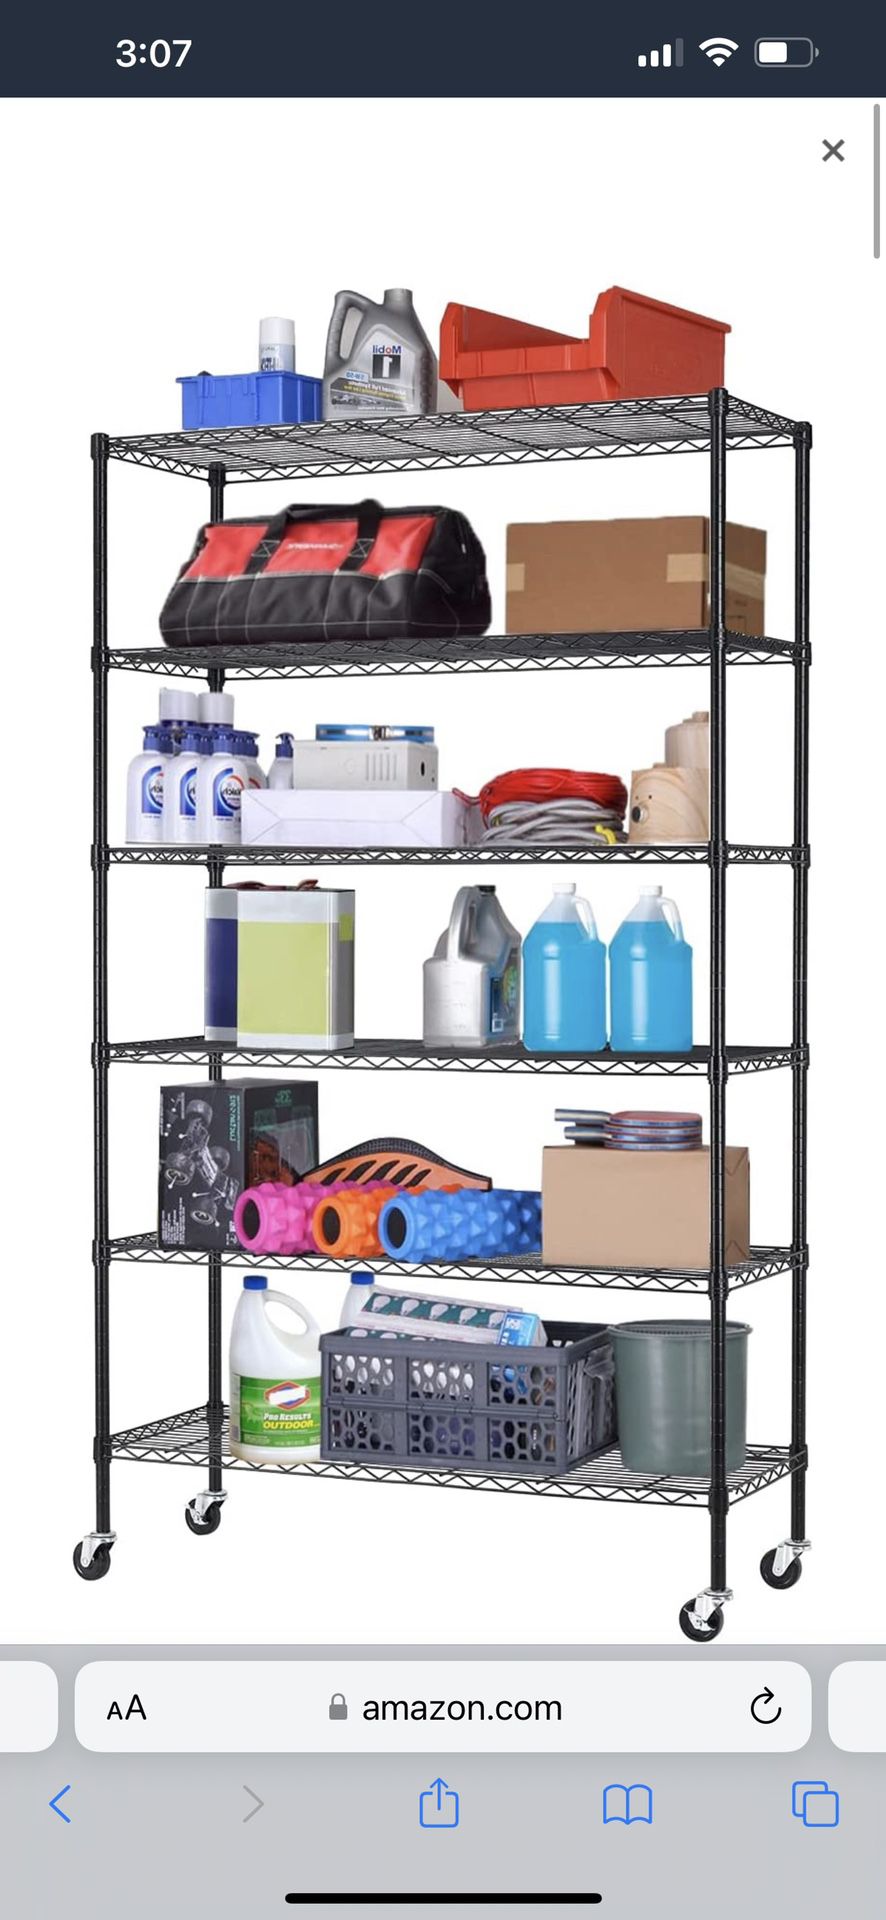 Storage Shelves 2100Lbs Capacity, 6-Shelf on Casters 48" L×18" W×82" H Wire Shelving Unit Adjustable Layer Metal Rack Strong Steel for Restaurant Gara